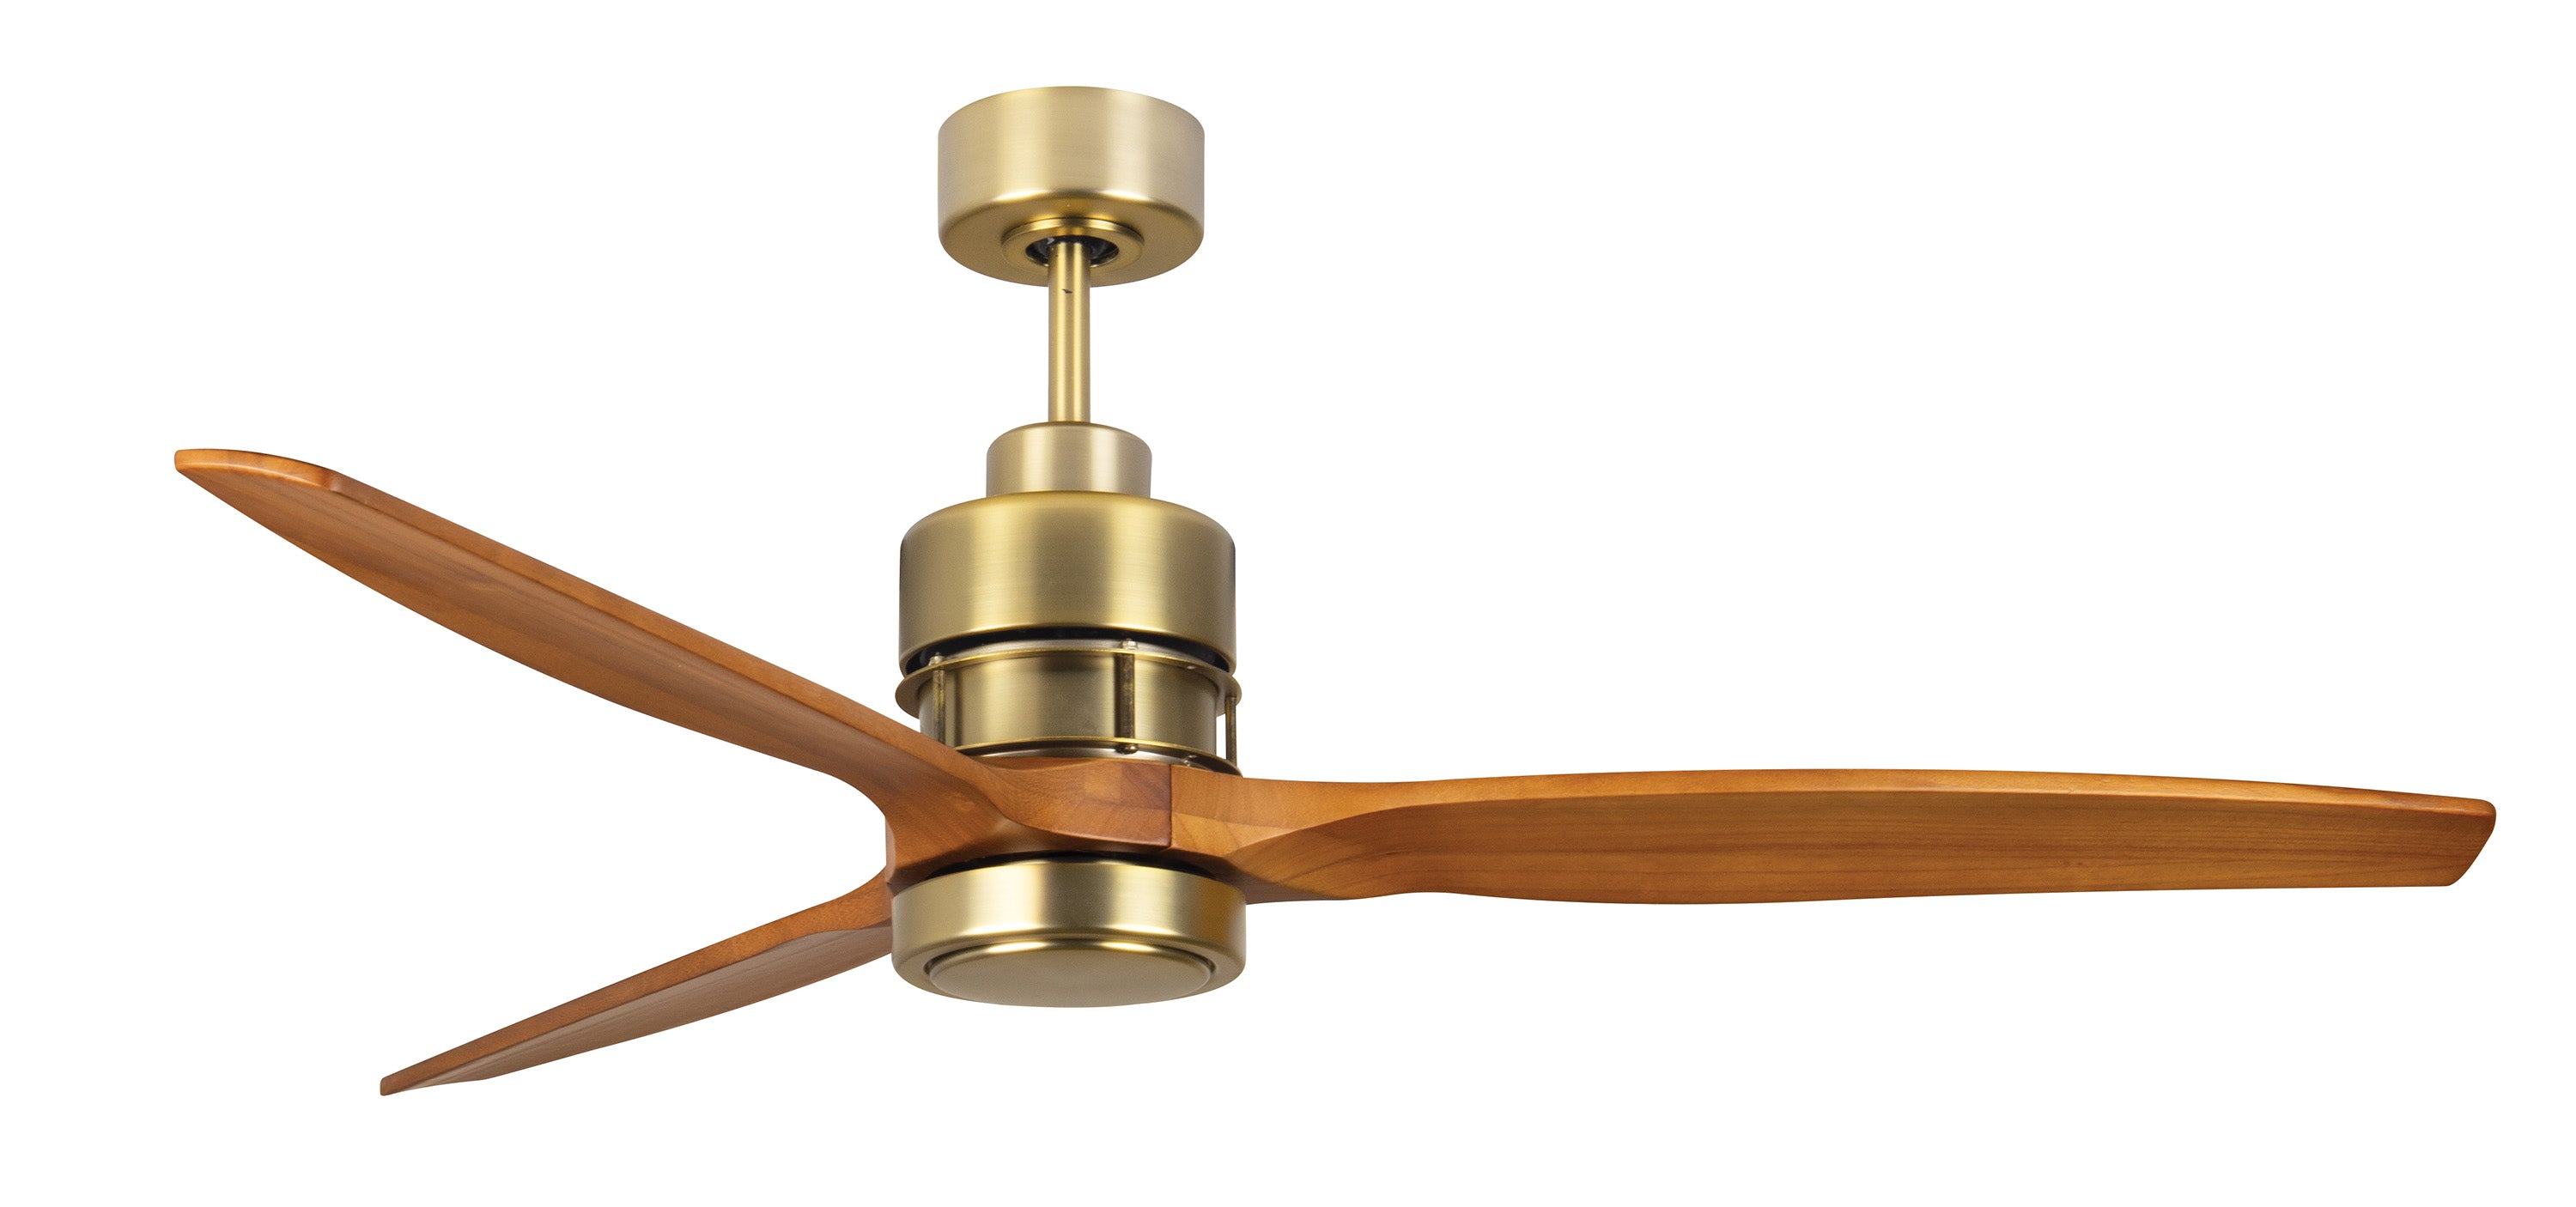 Sonnet Brass Ceiling Fan Lighting Connection Lighting Connection